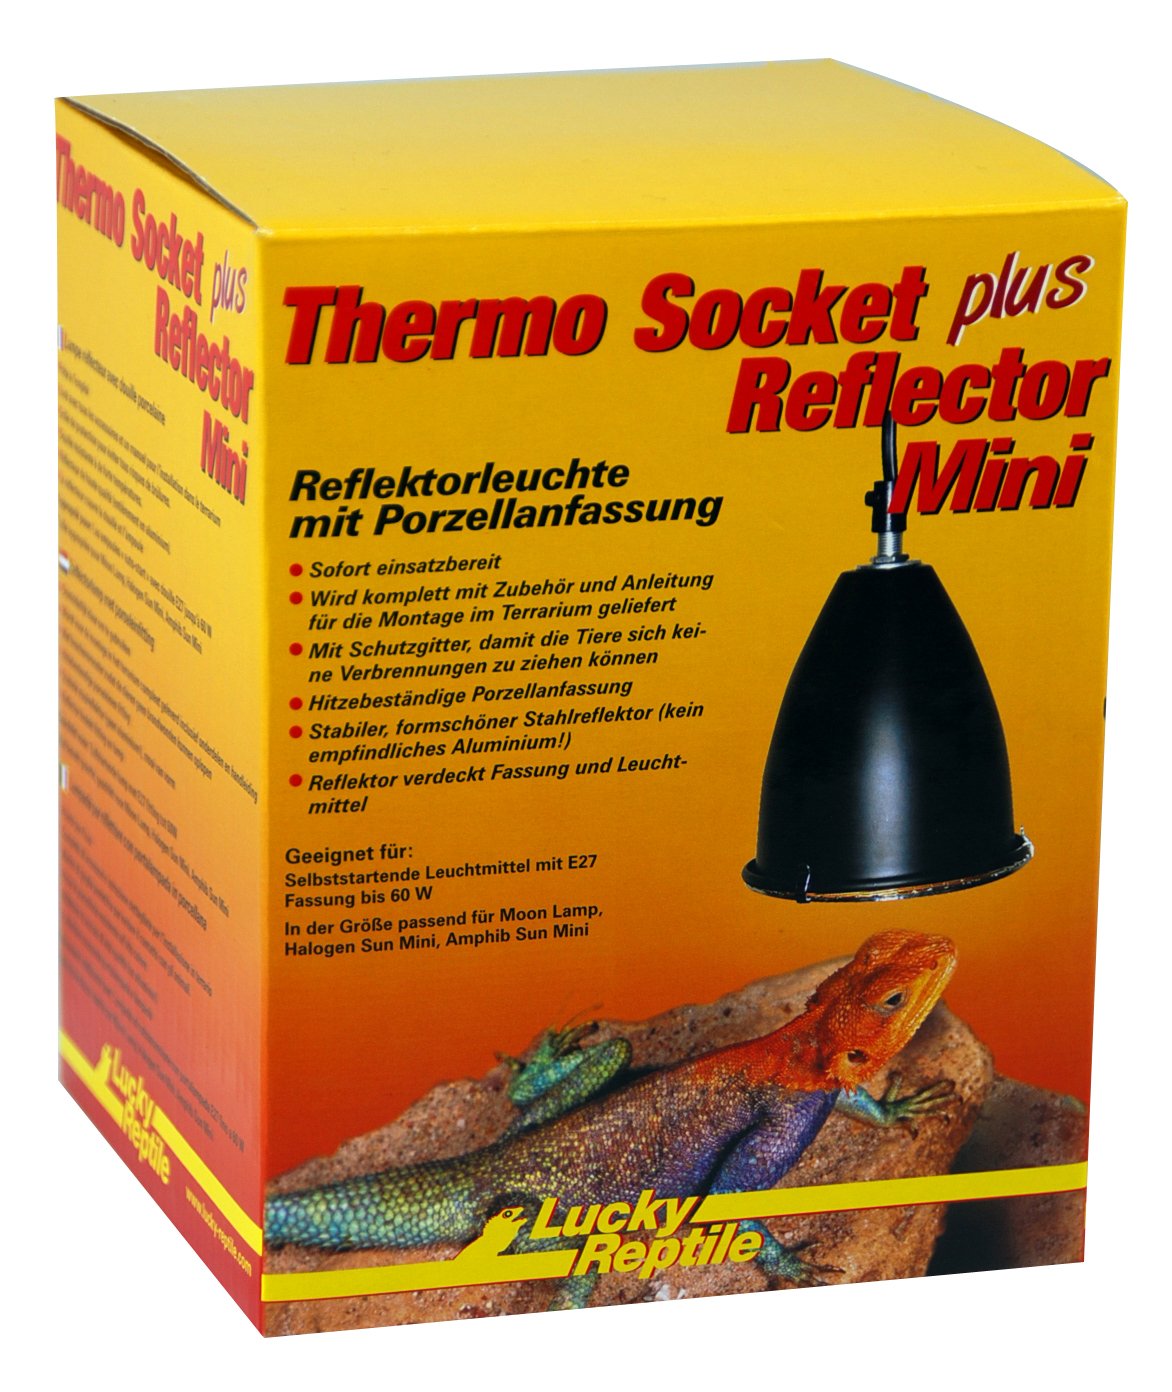 Import-Export Peter Hoch GmbH Thermo Socket mit Reflector Mini